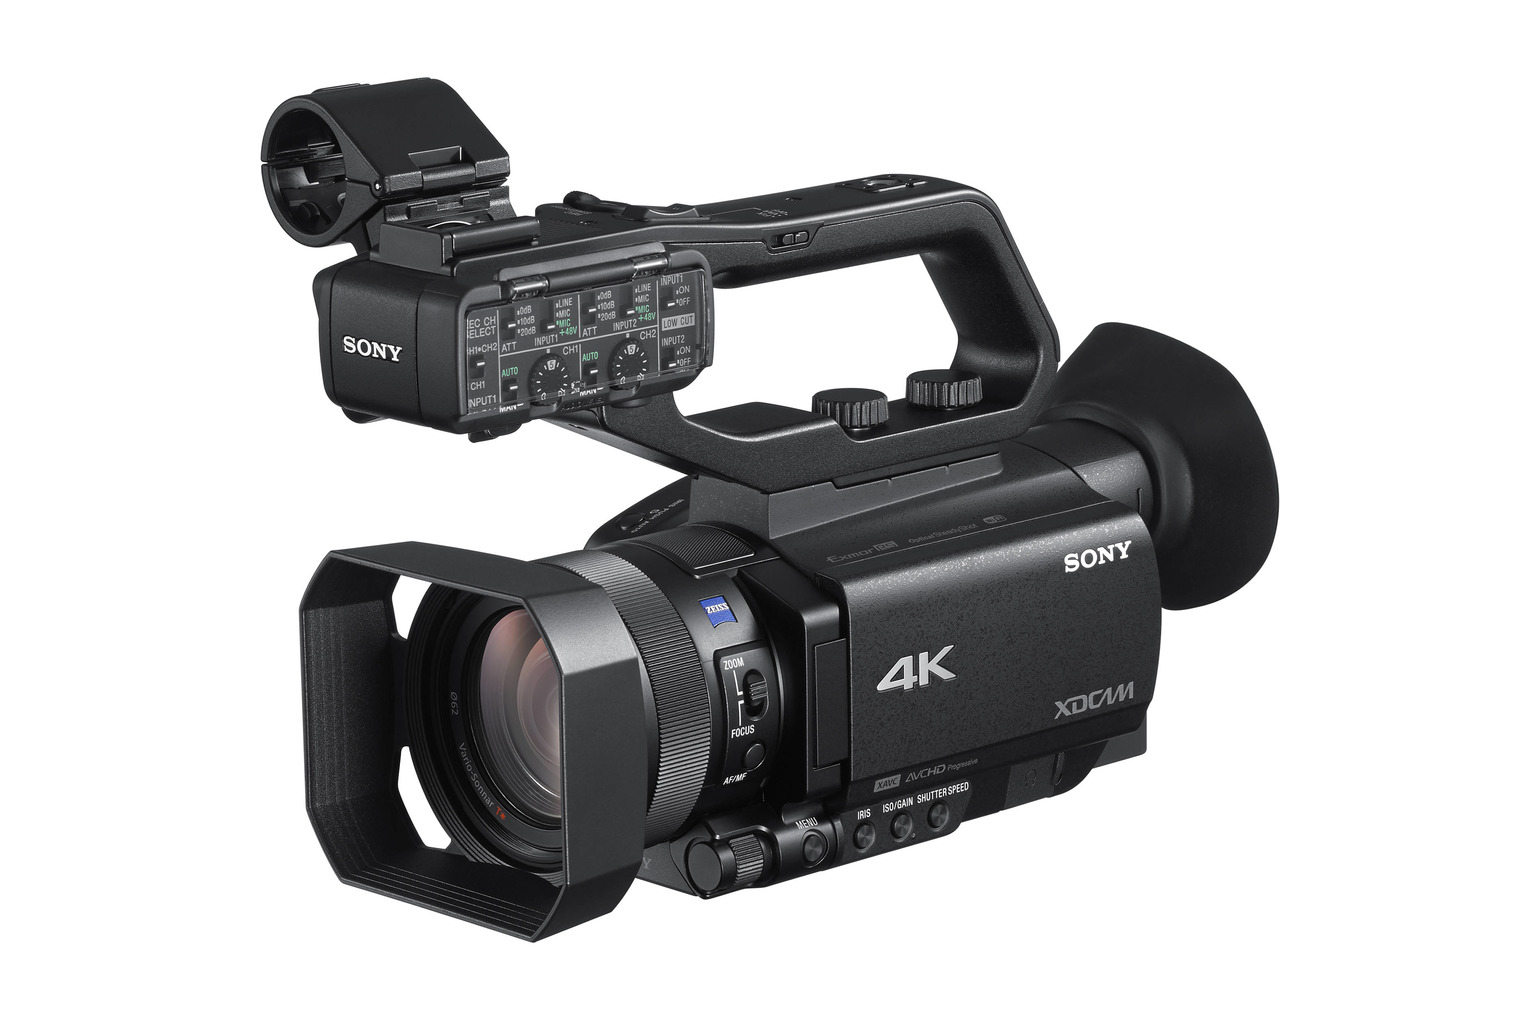 SONY PXW-Z90 4K HDR XDCAM with Fast Hybrid AF | AVC Group